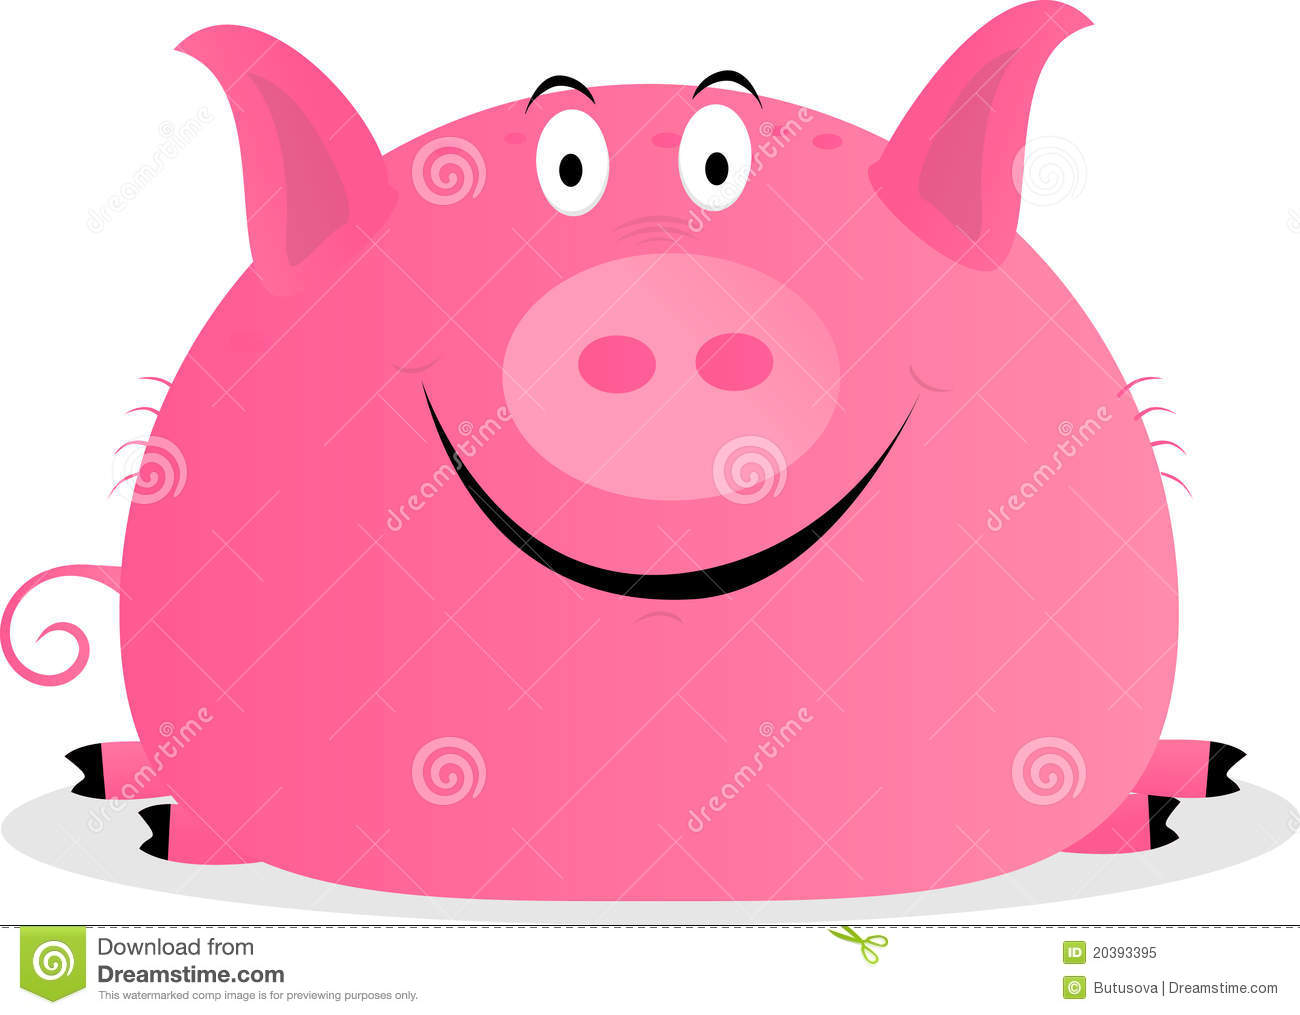 Cute Happy Pig Royalty Free Stock Photo   Image  20393395